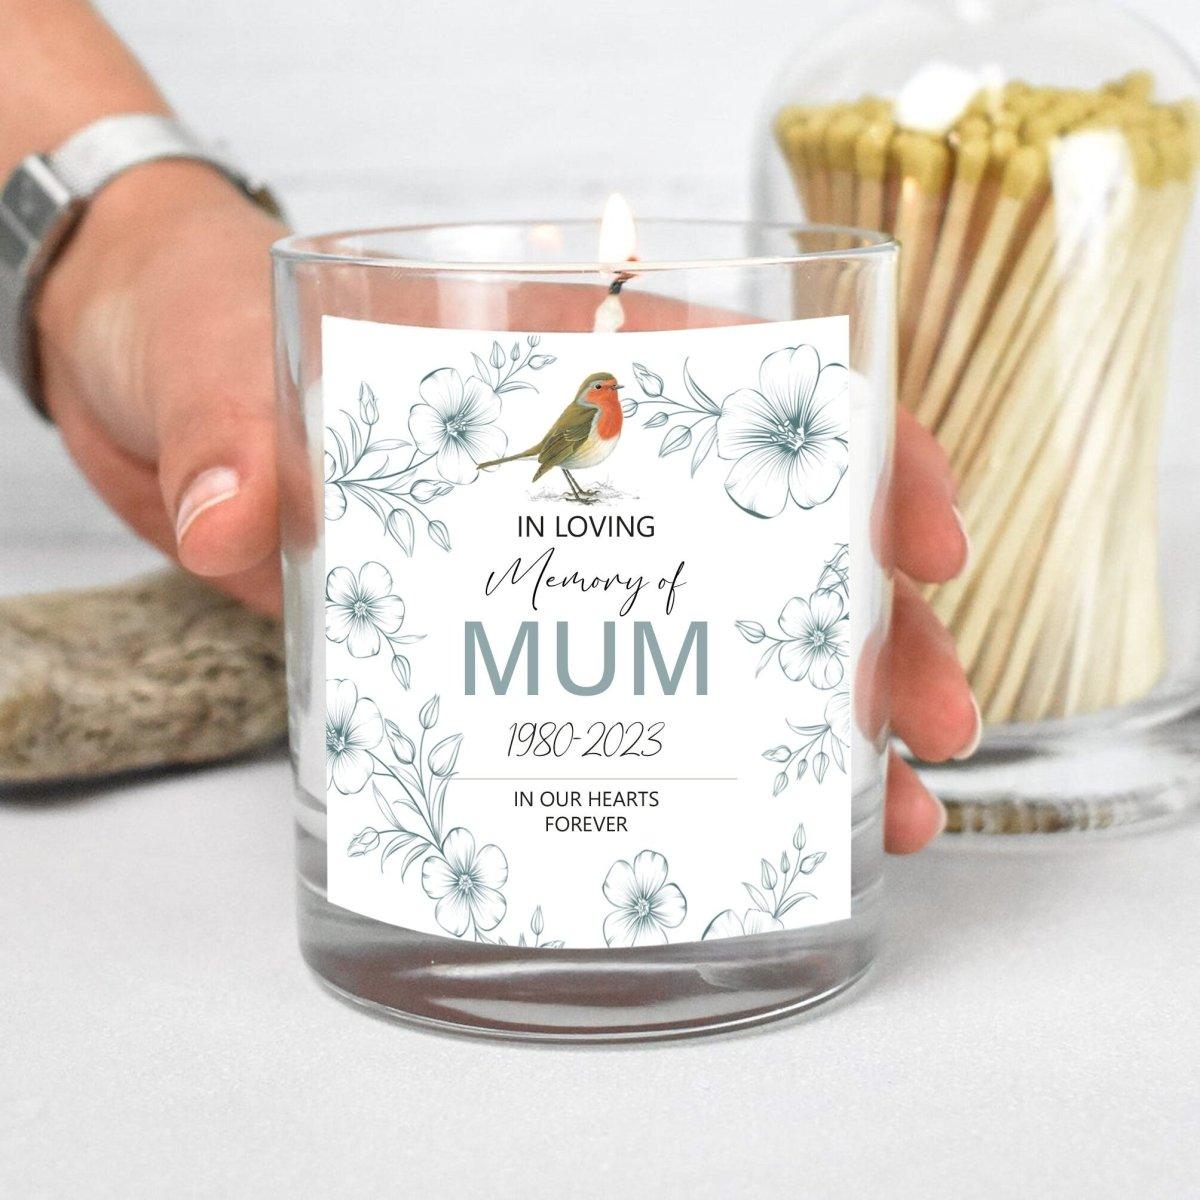 In memory of Mum Candle, Remembrance candle, Sympathy, Bereavement, Condolences, Mothers Day, Christmas, Mum Loss Candle, - Amy Lucy